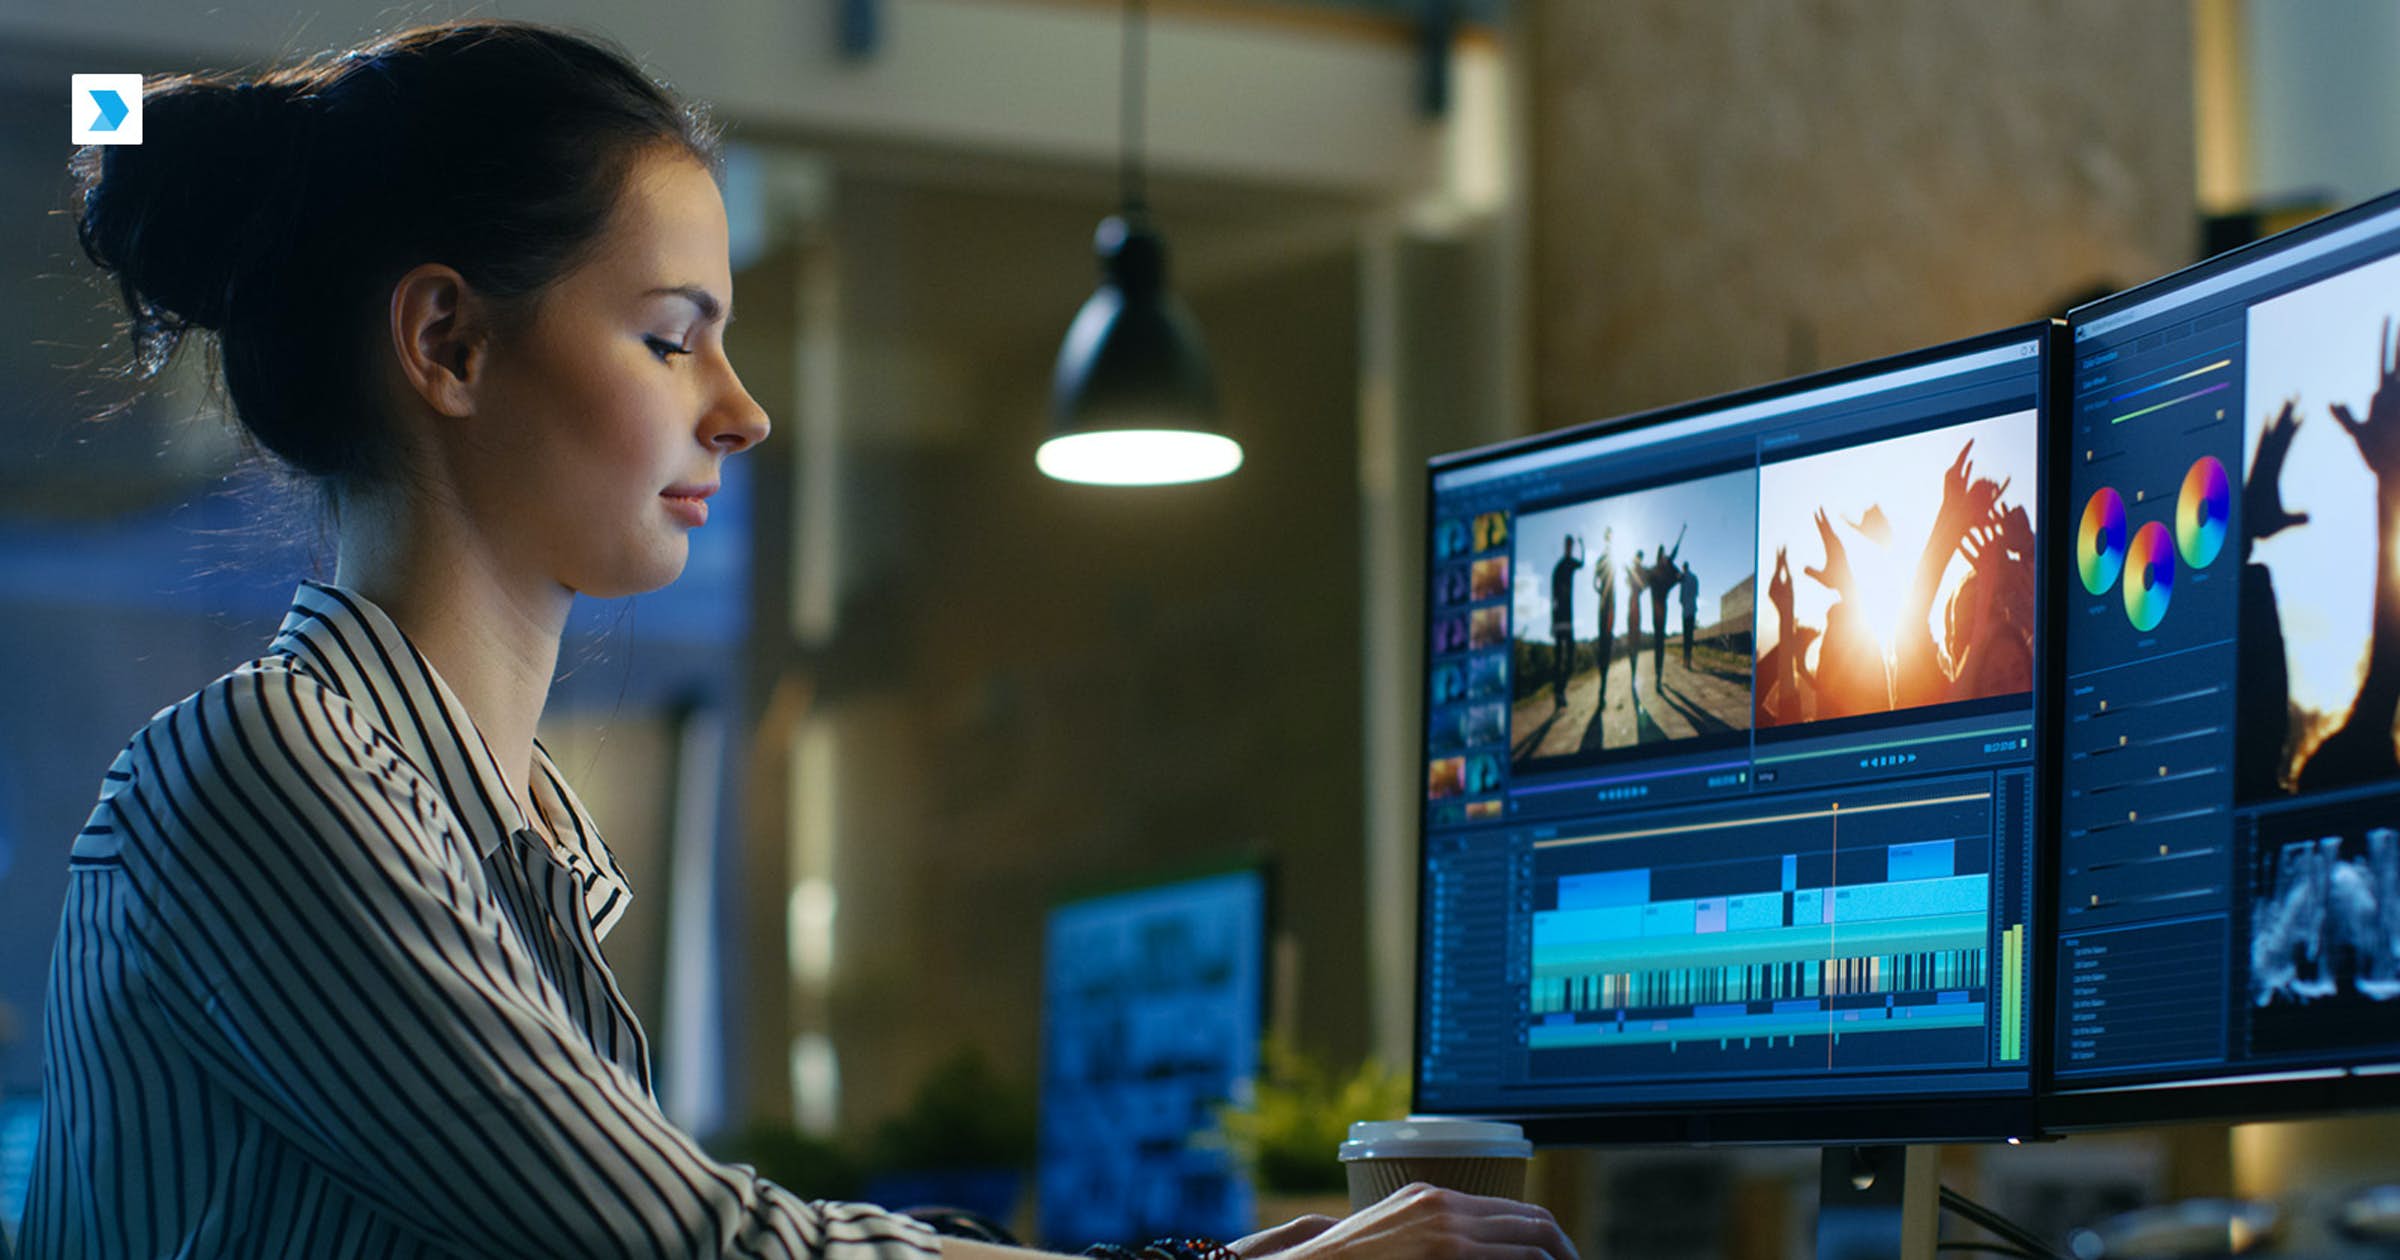 Top 10 Video Editing Software Programs for Computer or Laptop